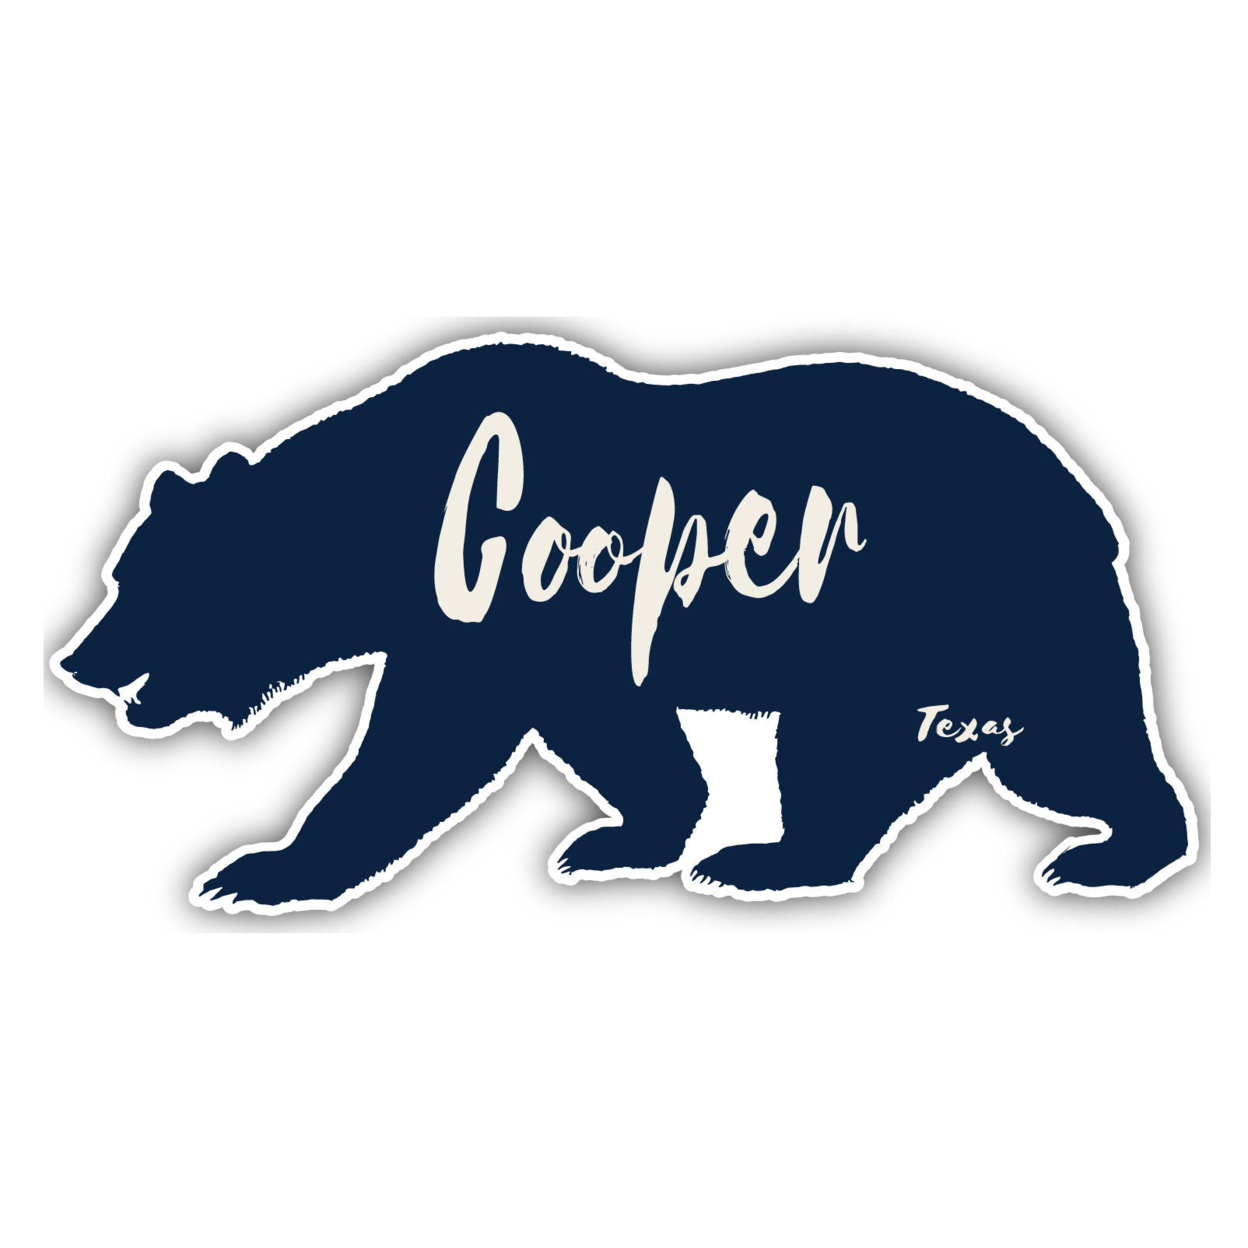 Cooper Texas Souvenir Decorative Stickers (Choose Theme And Size) - 4-Pack, 4-Inch, Bear